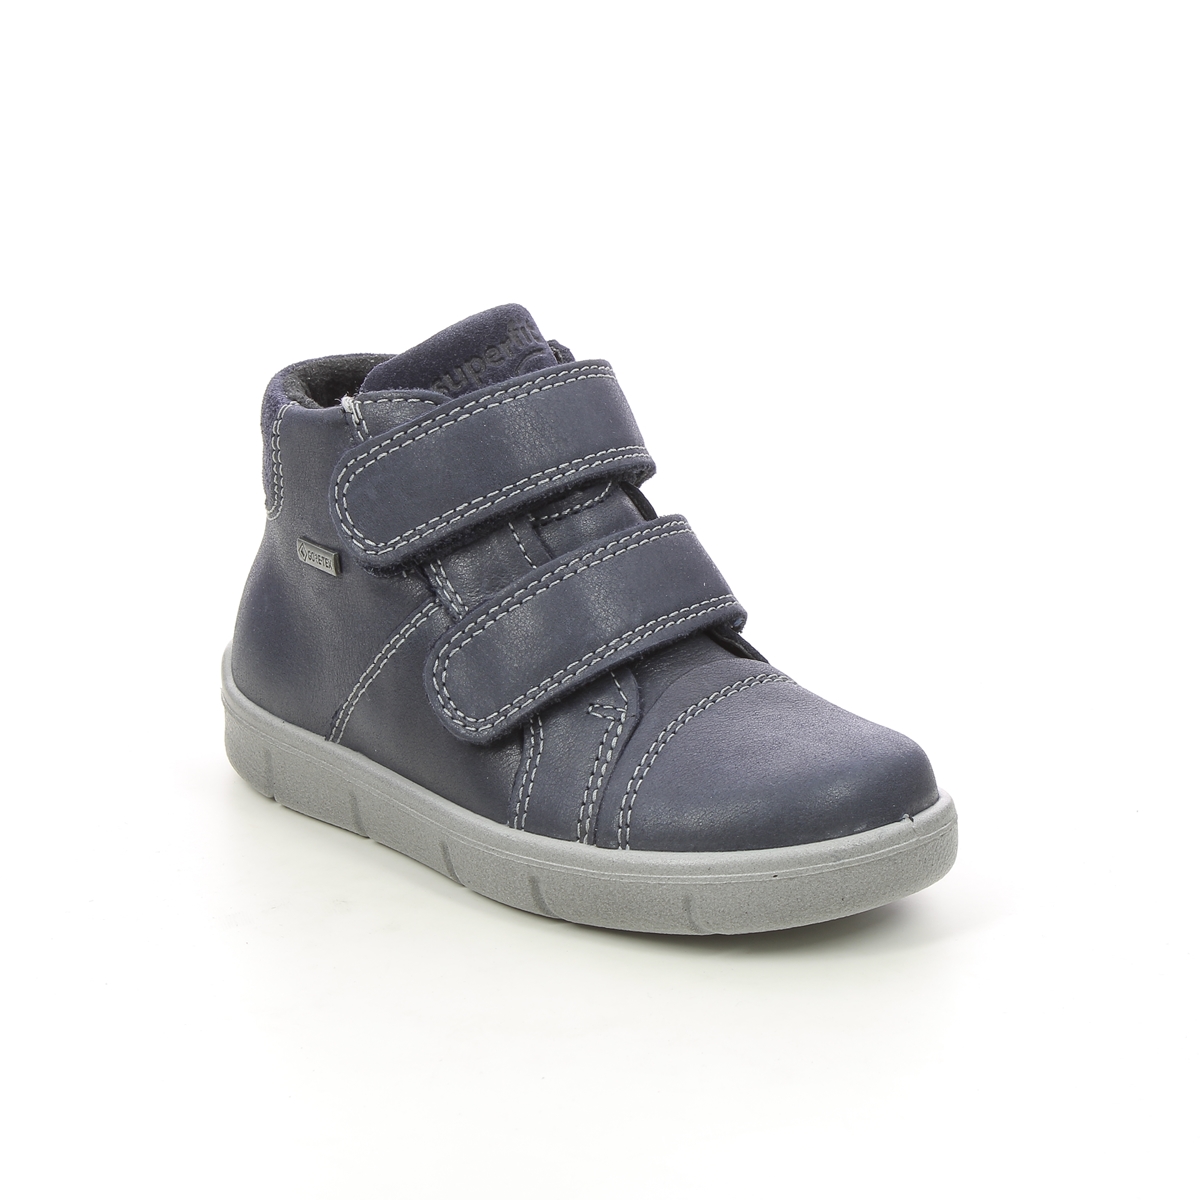 Superfit Ulli 2V Gtx Navy Leather Kids Toddler Boys Boots 0800423-8000 In Size 25 In Plain Navy Leather